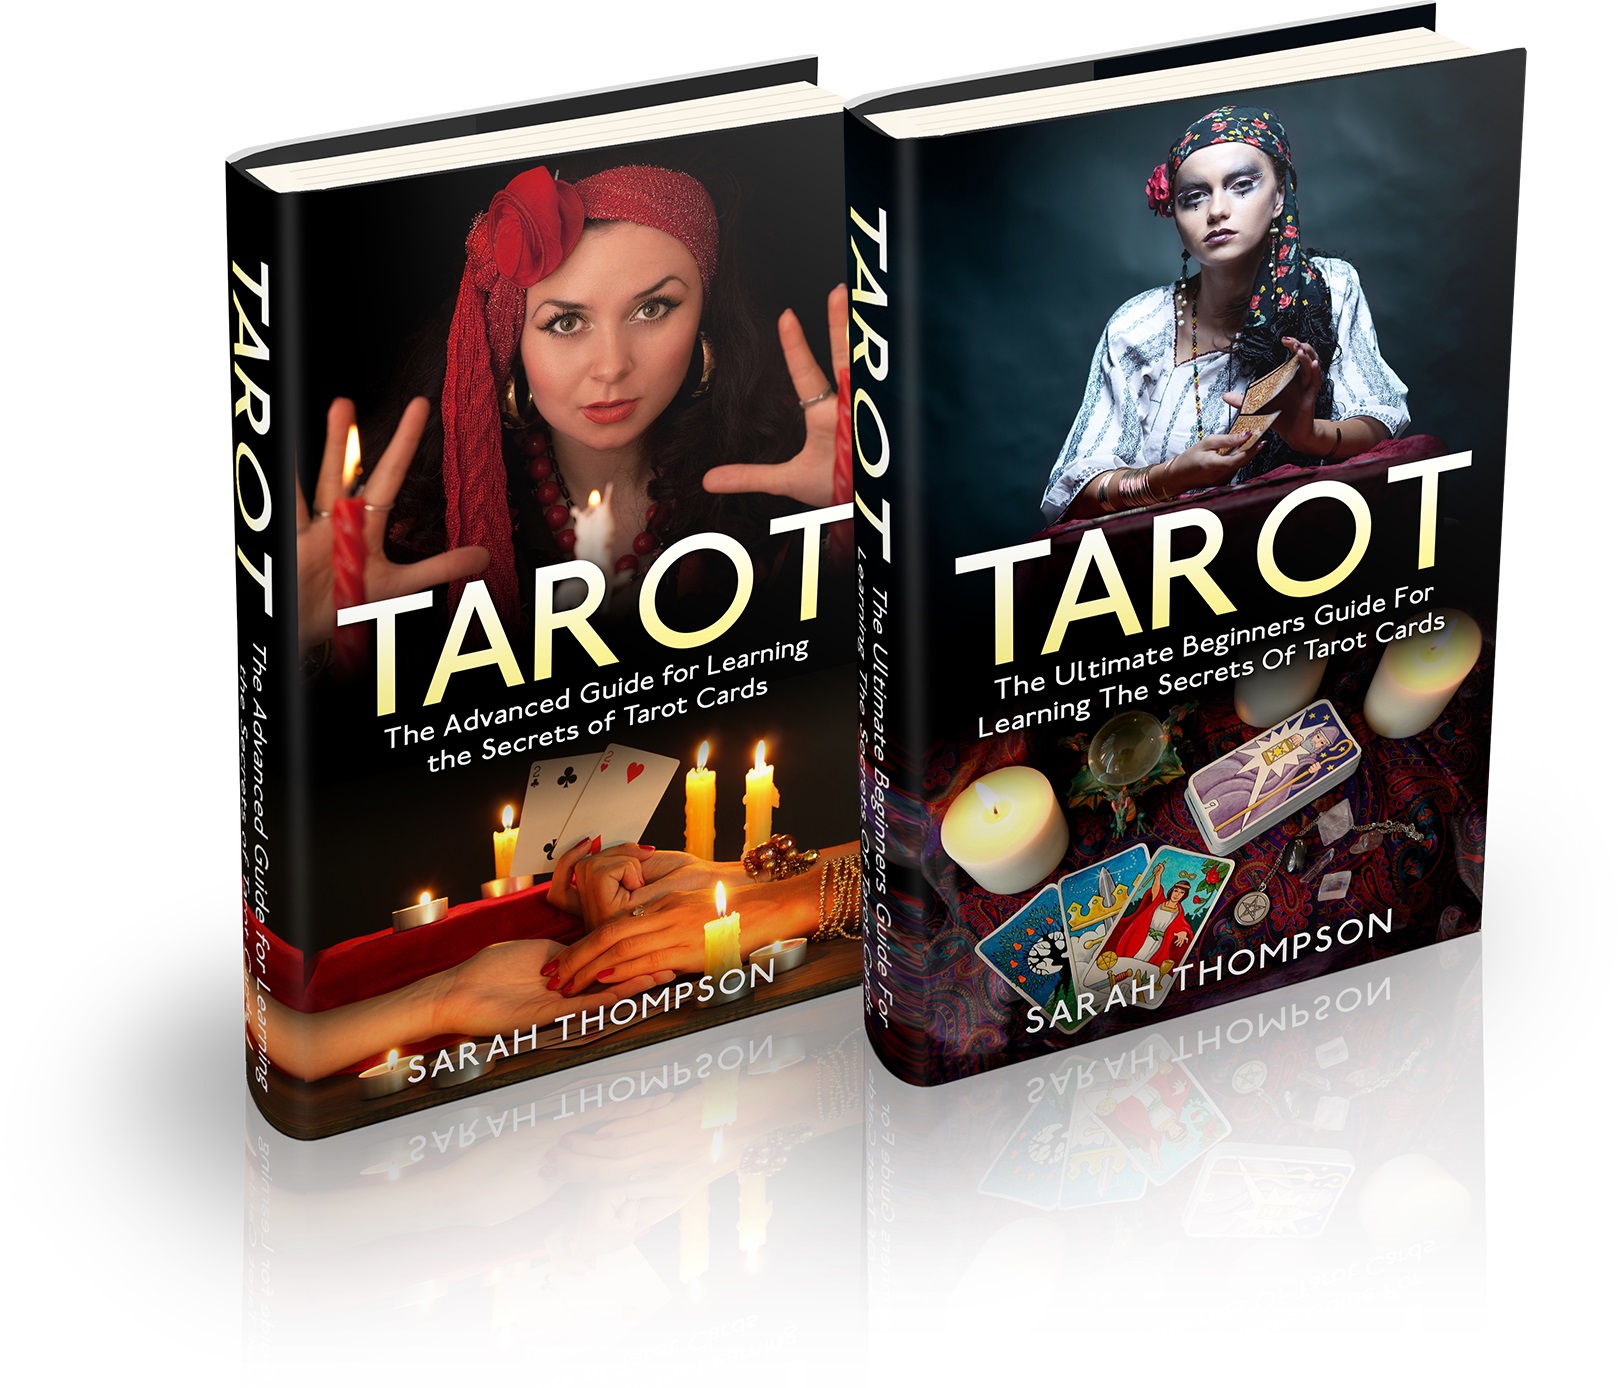 FREE: Tarot: Box Set: The Absolute Beginners Guide for Learning the Secrets of Tarot Cards by Sarah Thompson